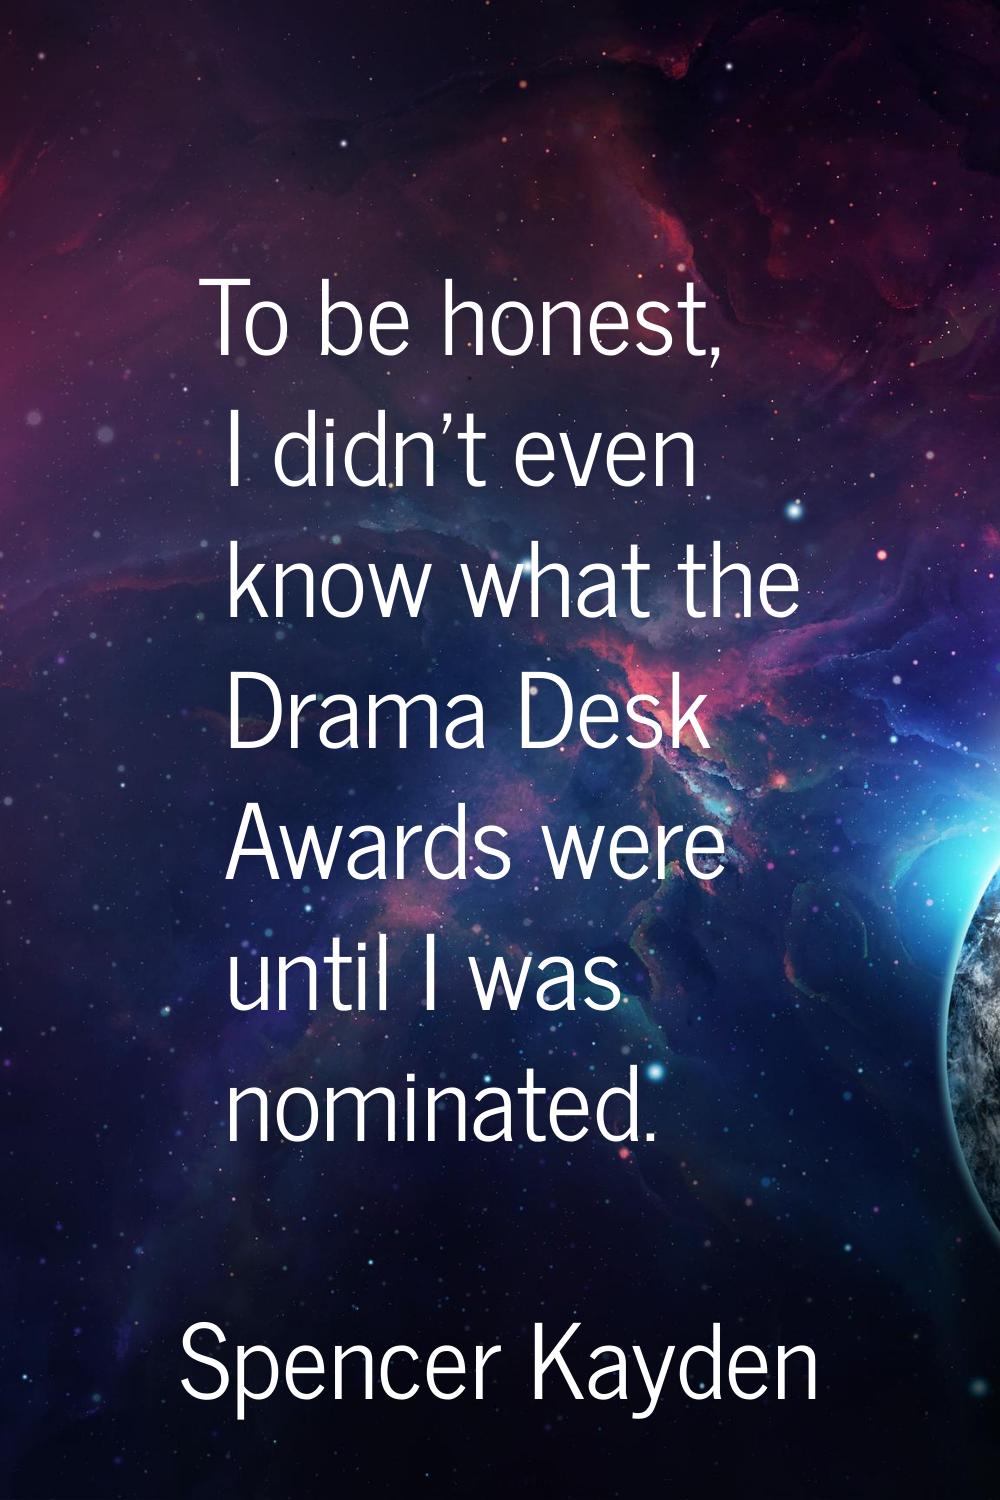 To be honest, I didn't even know what the Drama Desk Awards were until I was nominated.